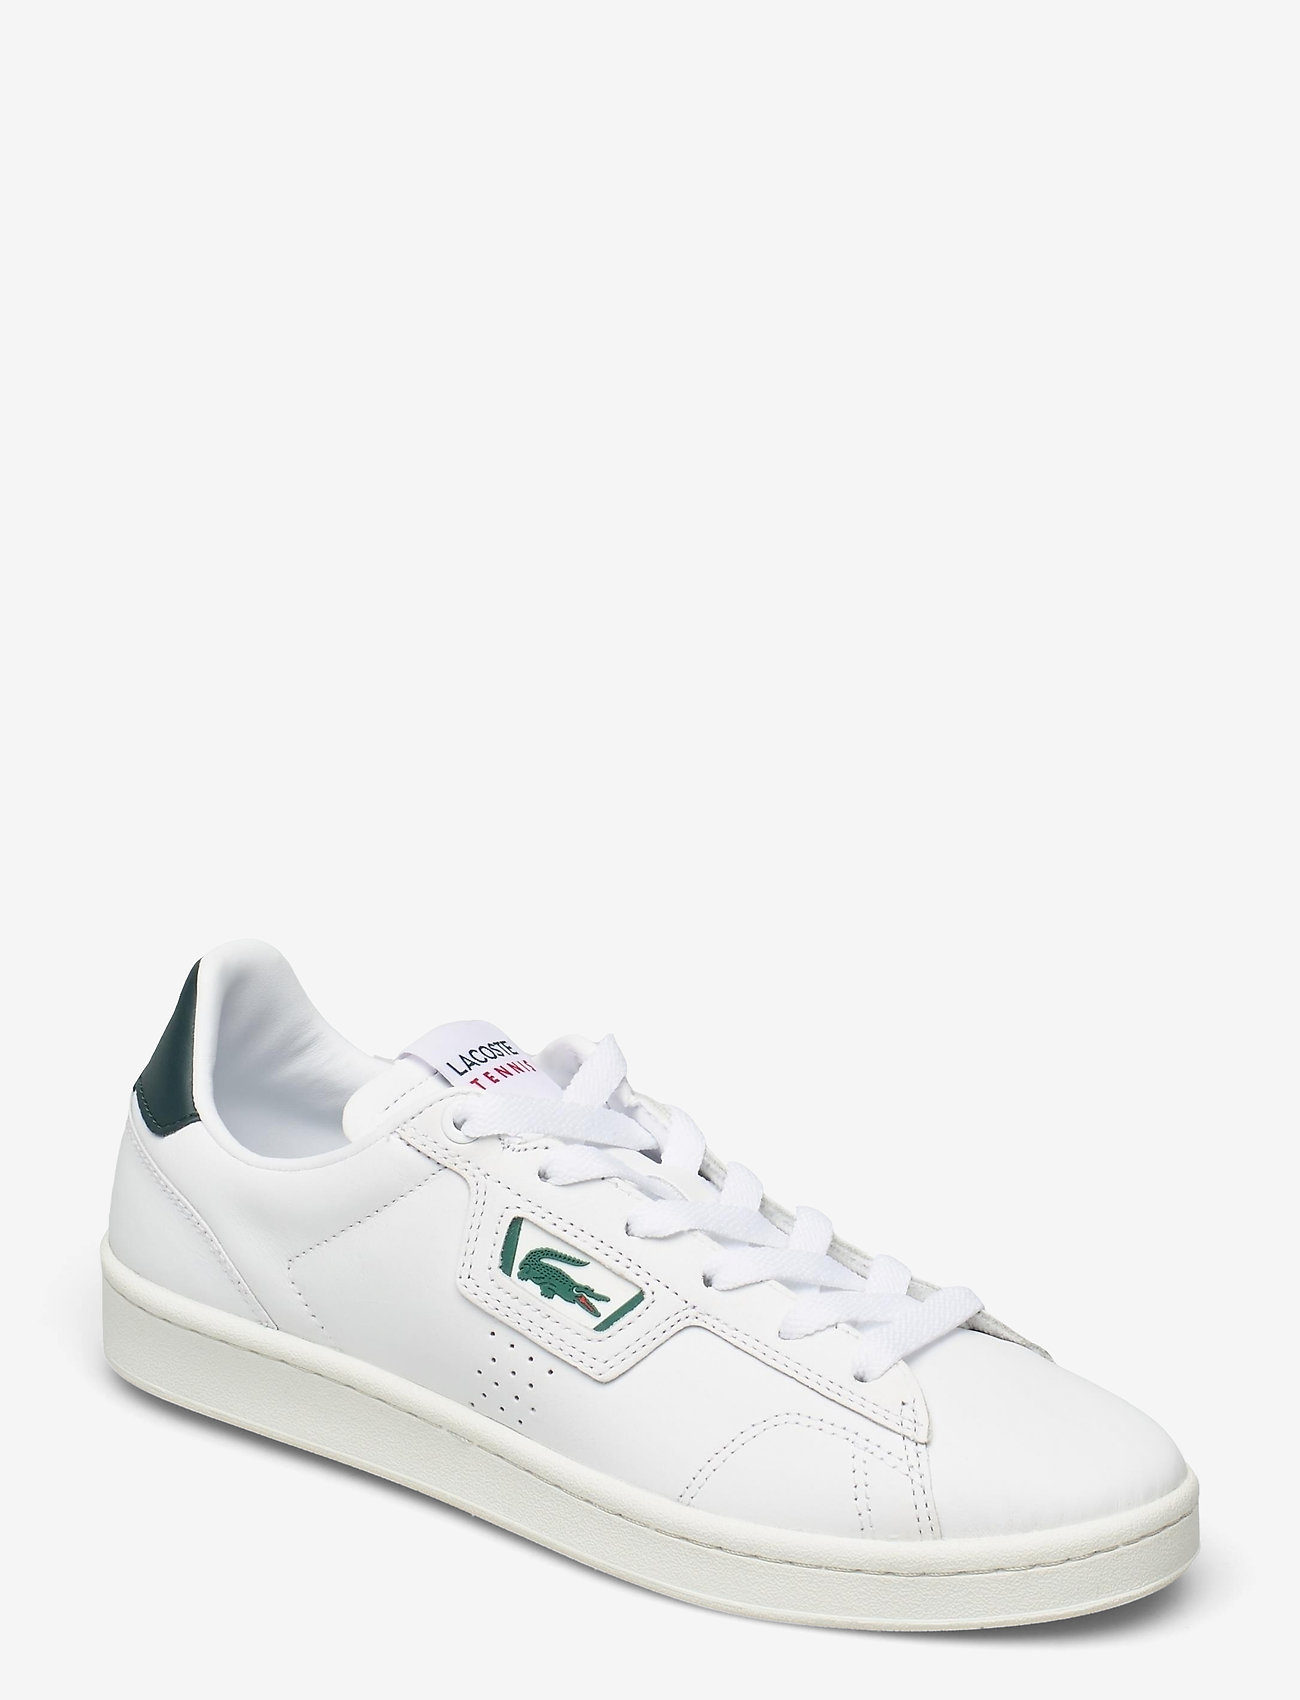 Lacoste Shoes - MASTERS CLAS 07211 - low top sneakers - wht/dk grn - 0